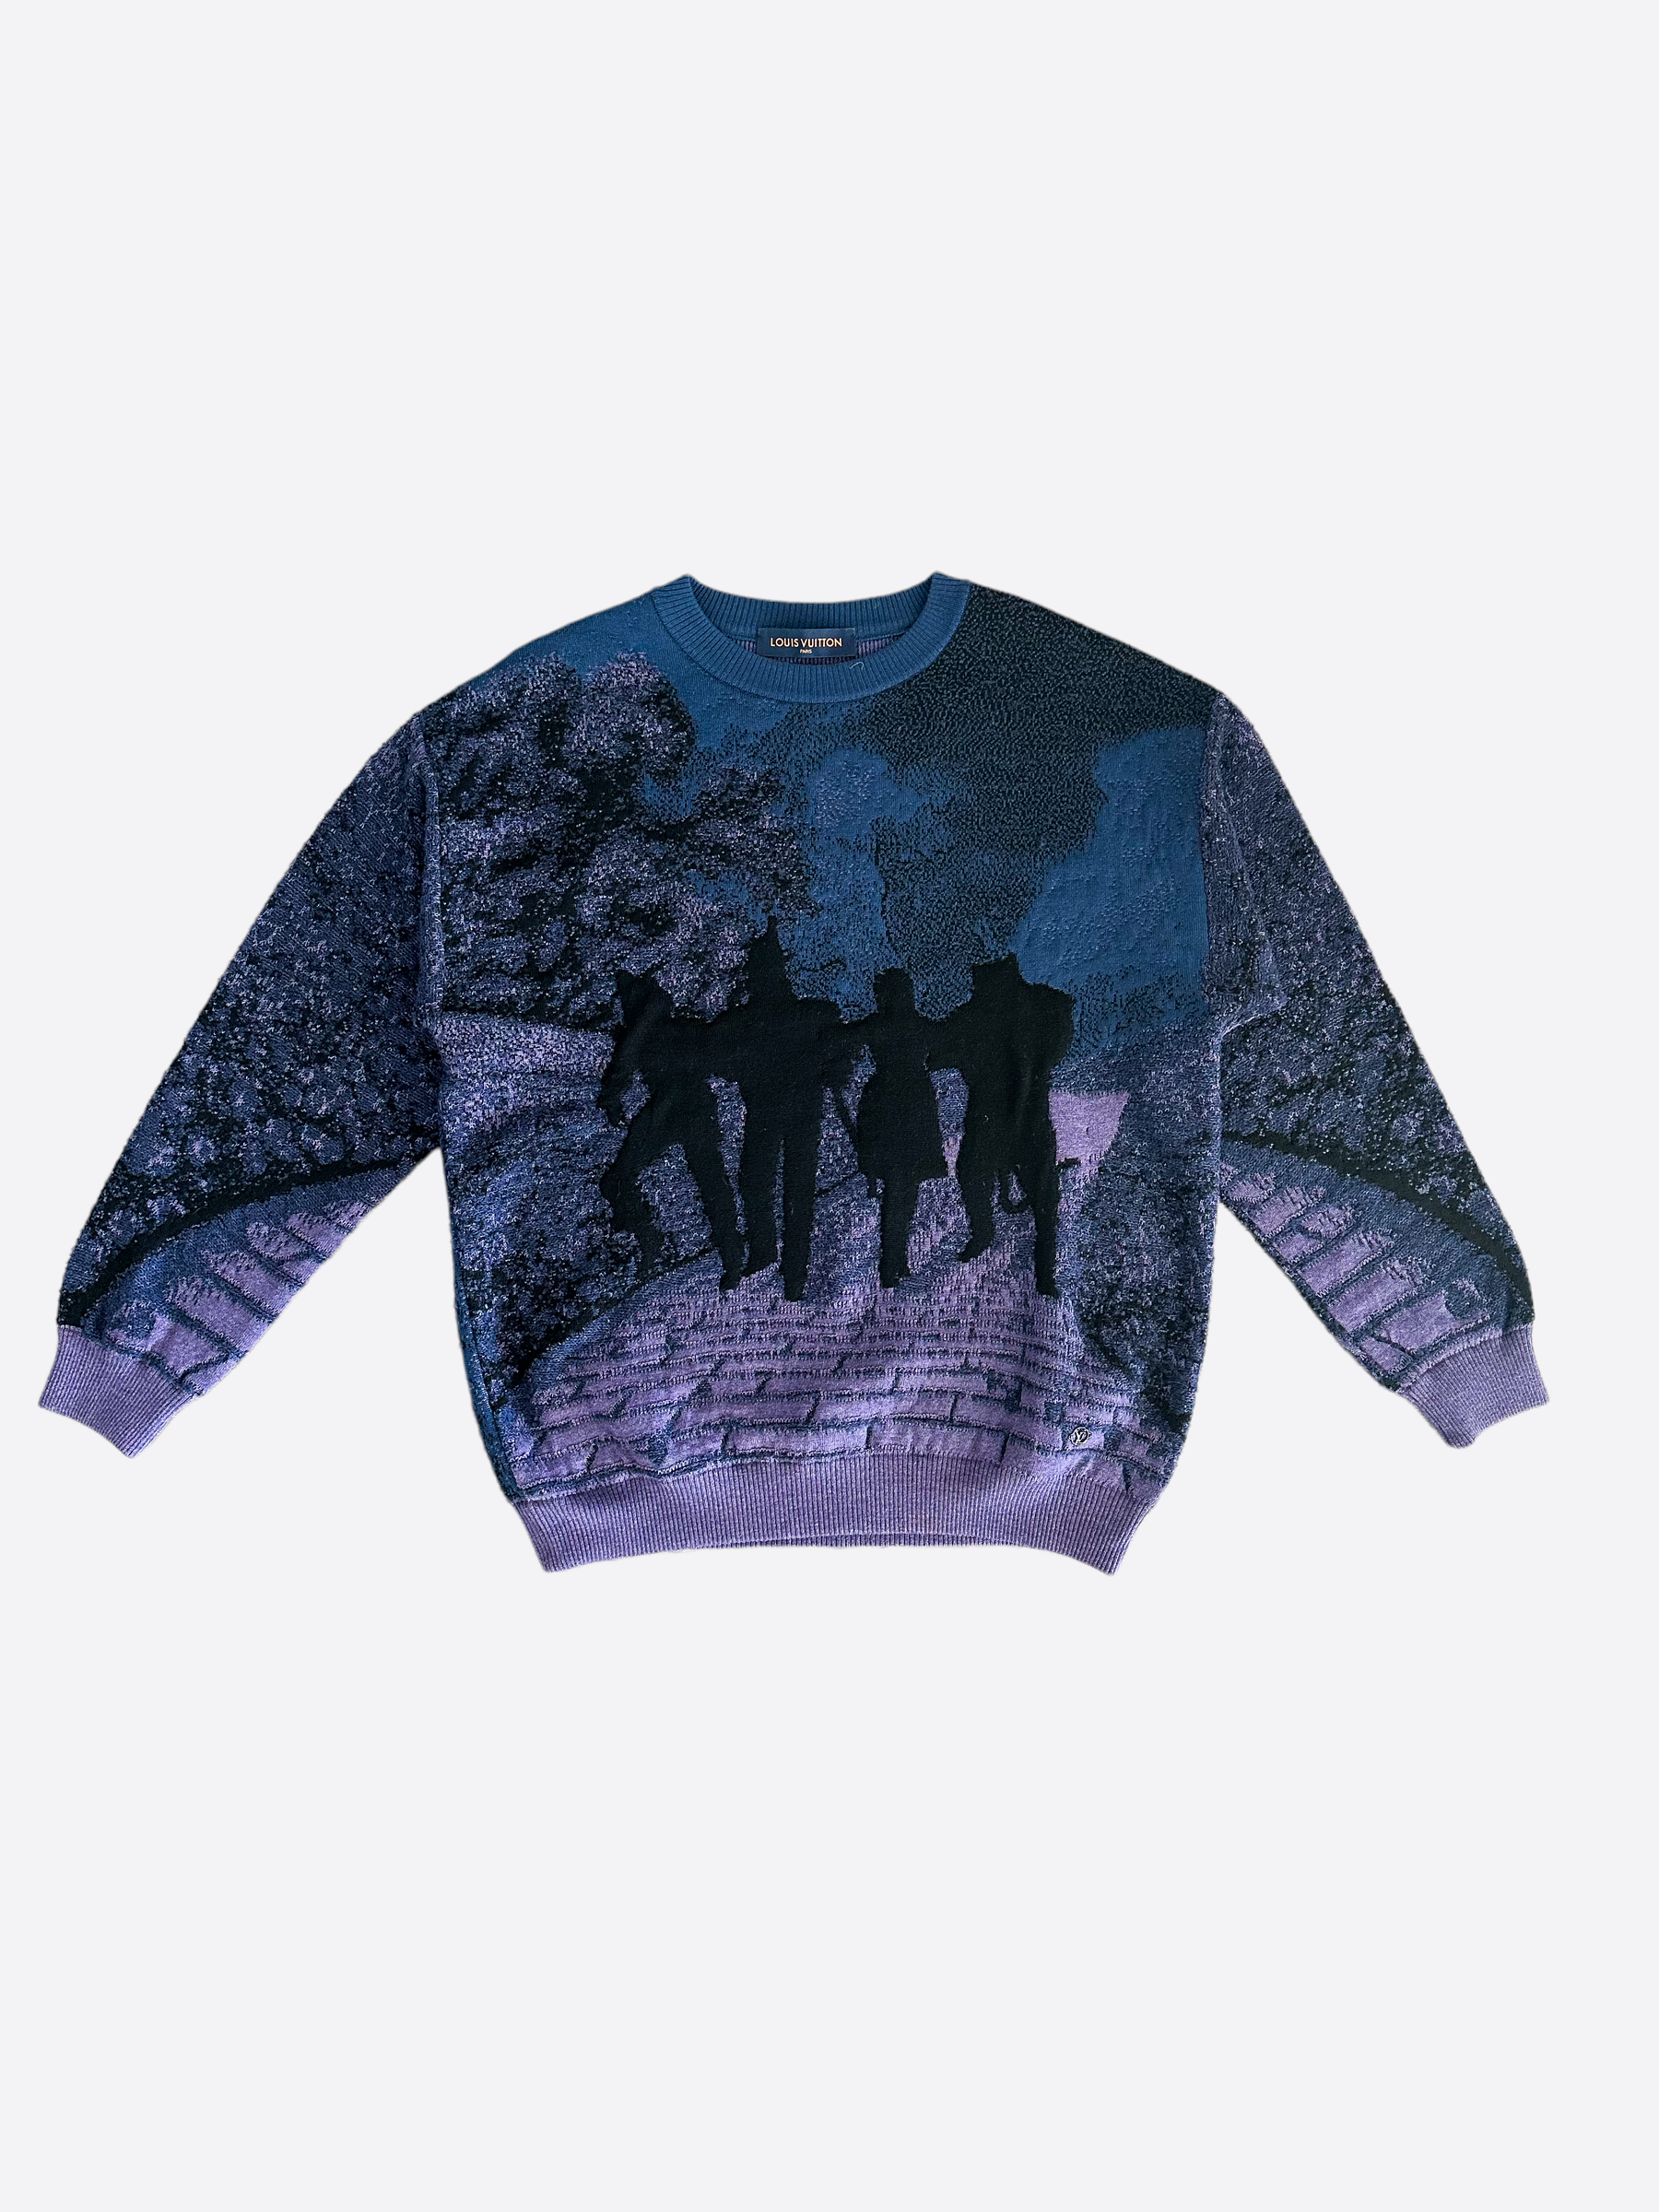 Louis Vuitton Wizard of Oz Sweaters Available in Store!! Purple - Size  Small $1400 Multicolor - Size Medium $1800